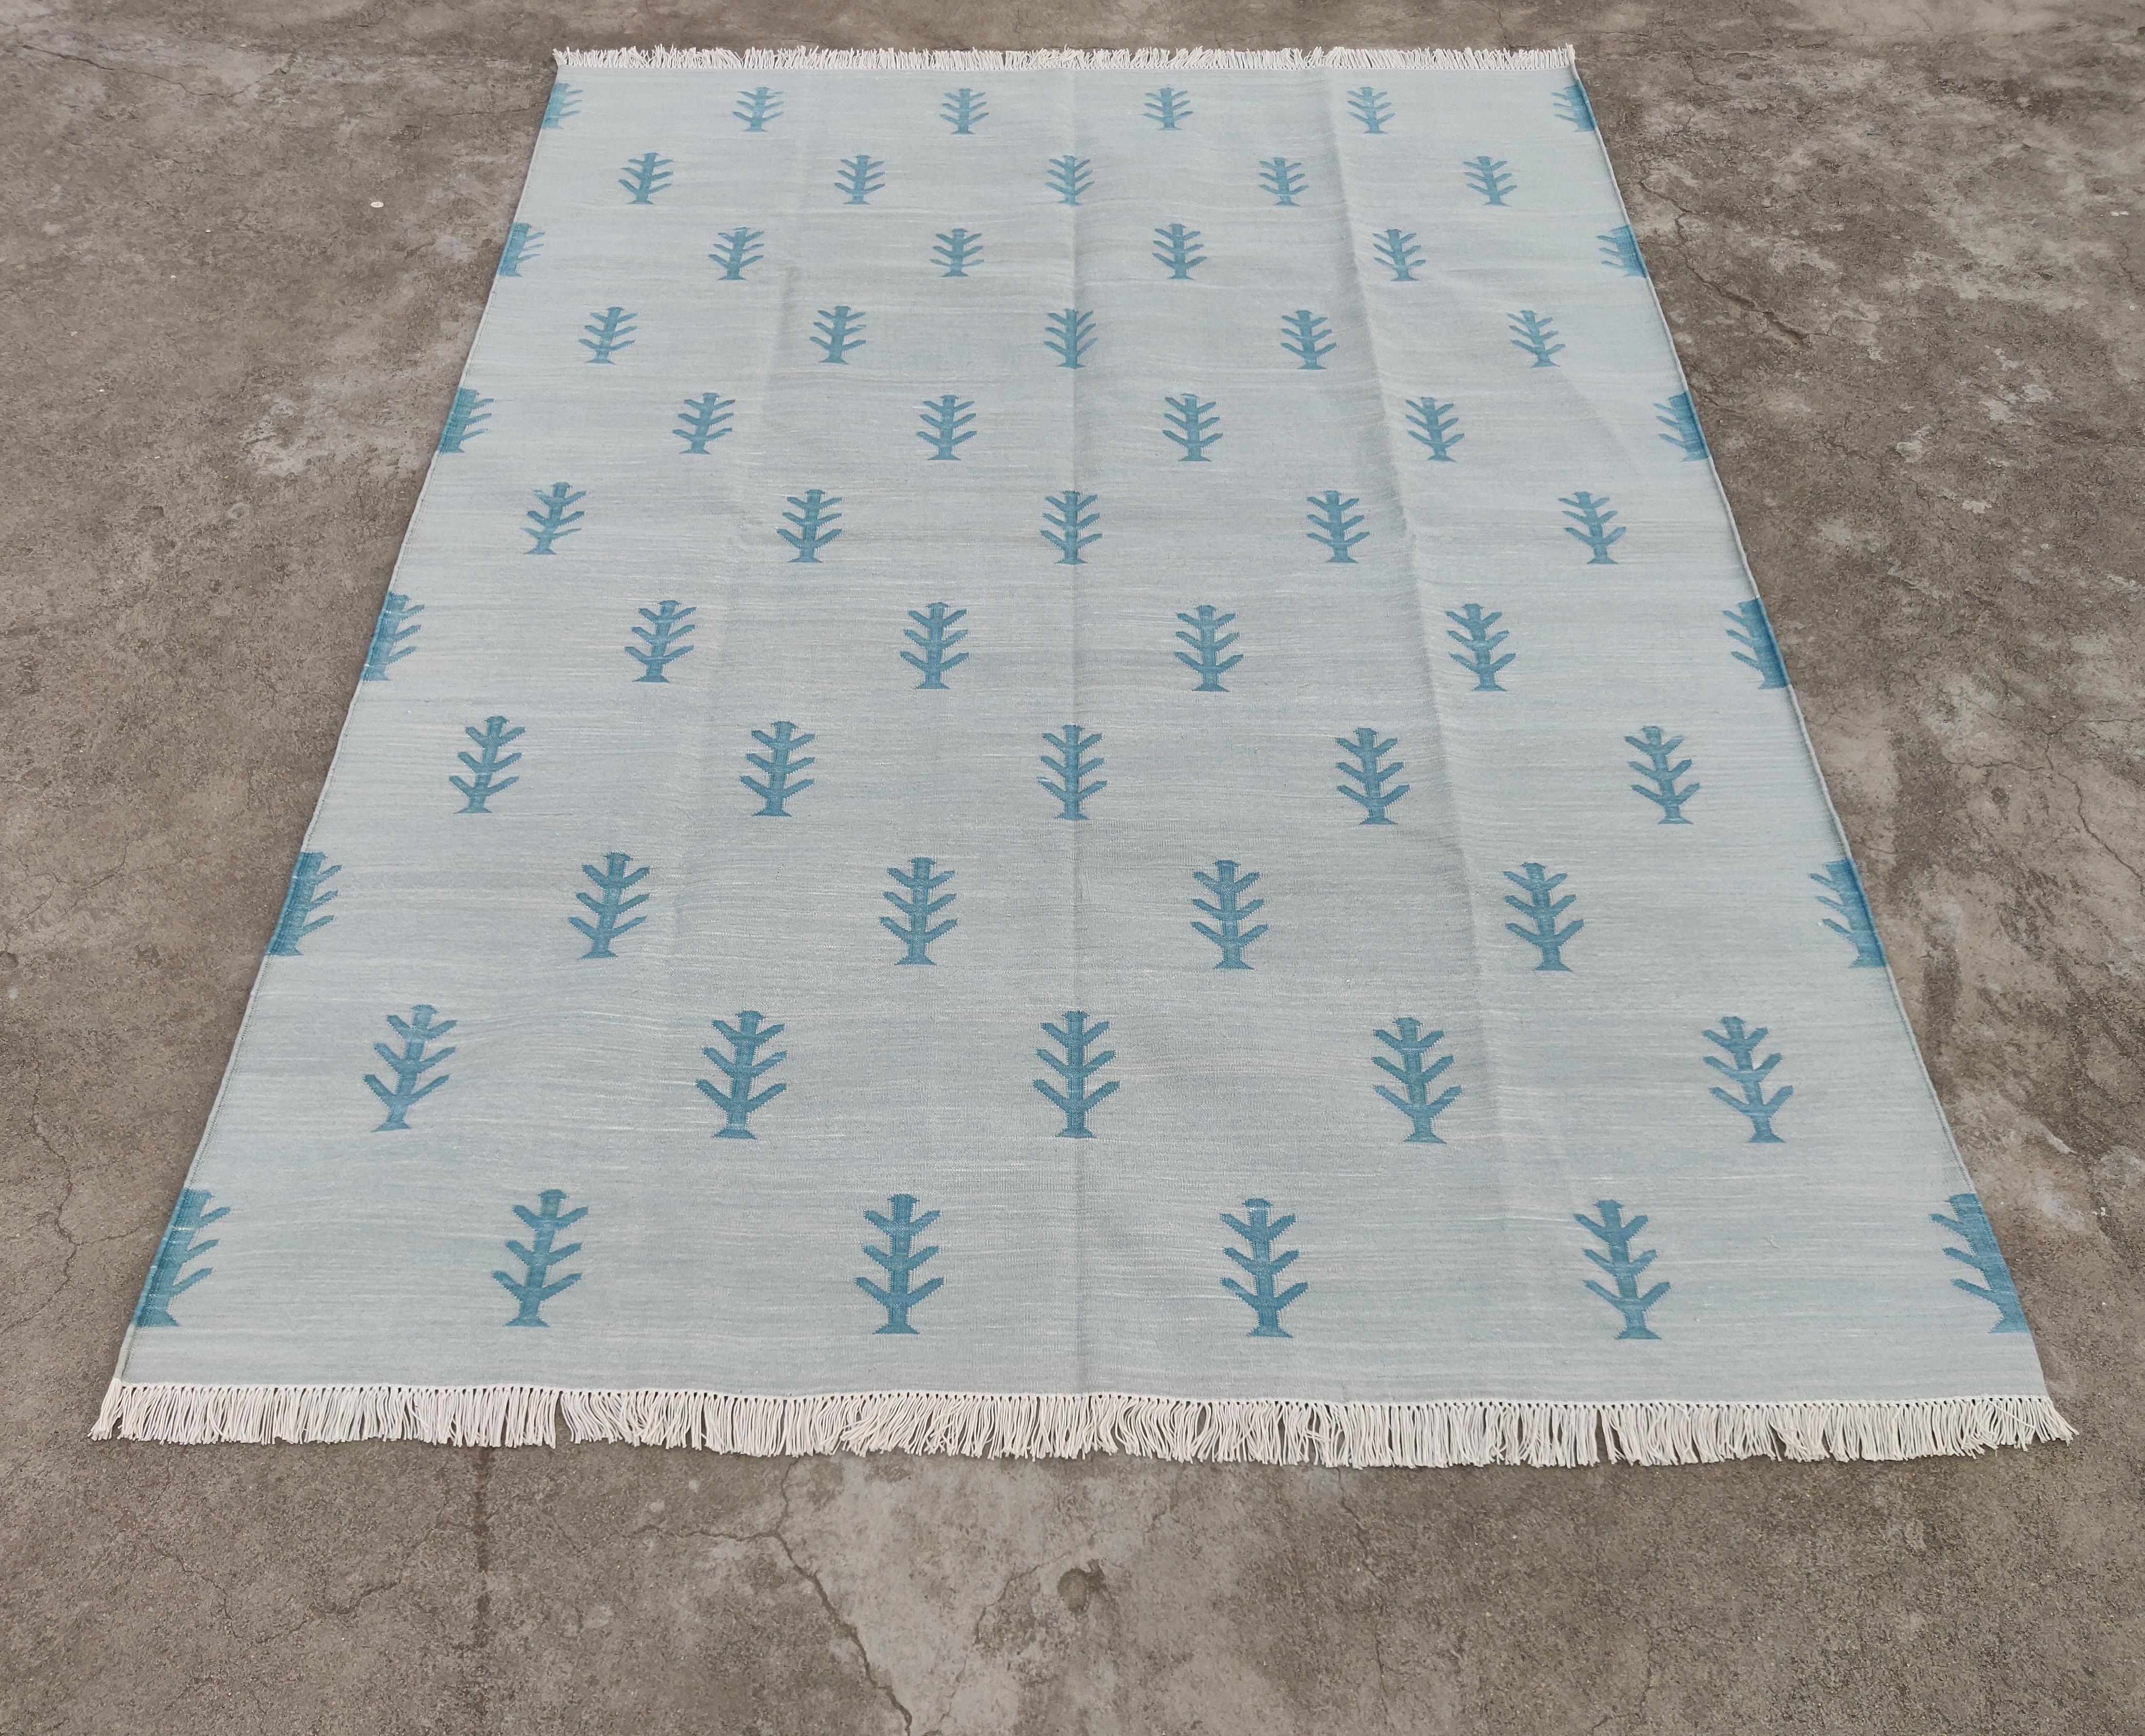 Handmade Cotton Area Flat Weave Rug, 5x7 Grey, Blue Tree Pattern Indian Dhurrie For Sale 1